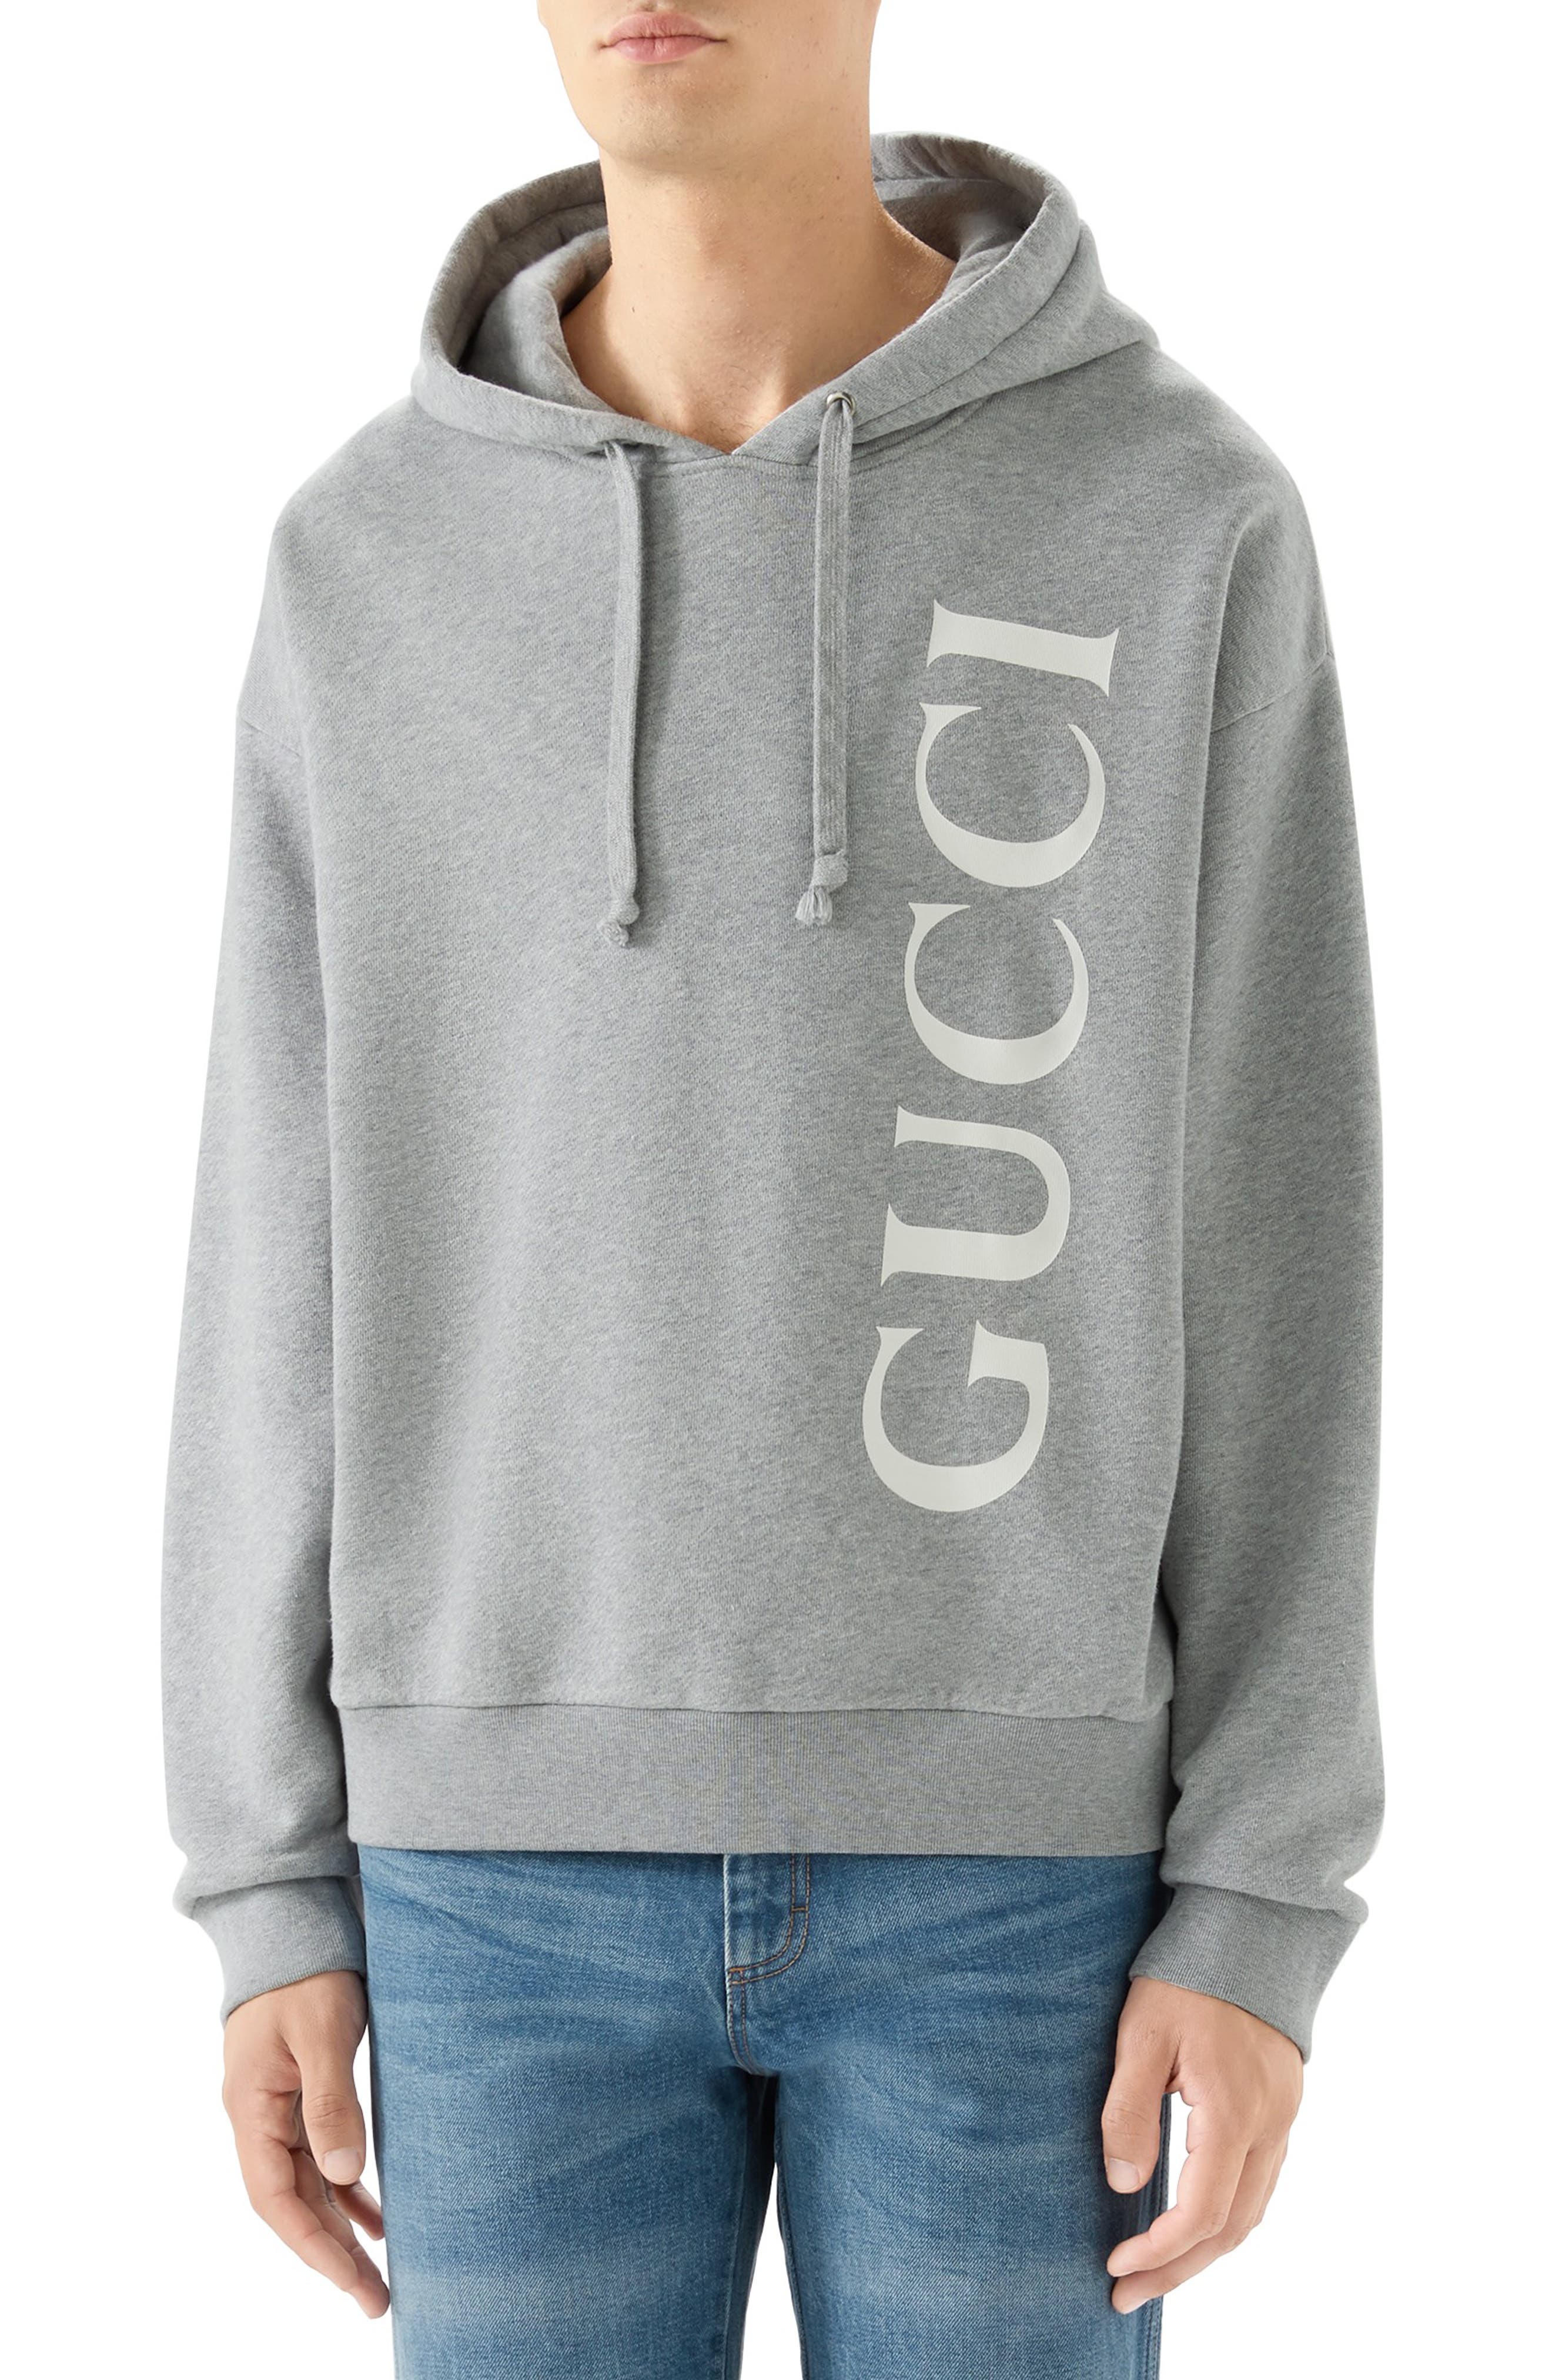 men's gucci clothing for cheap